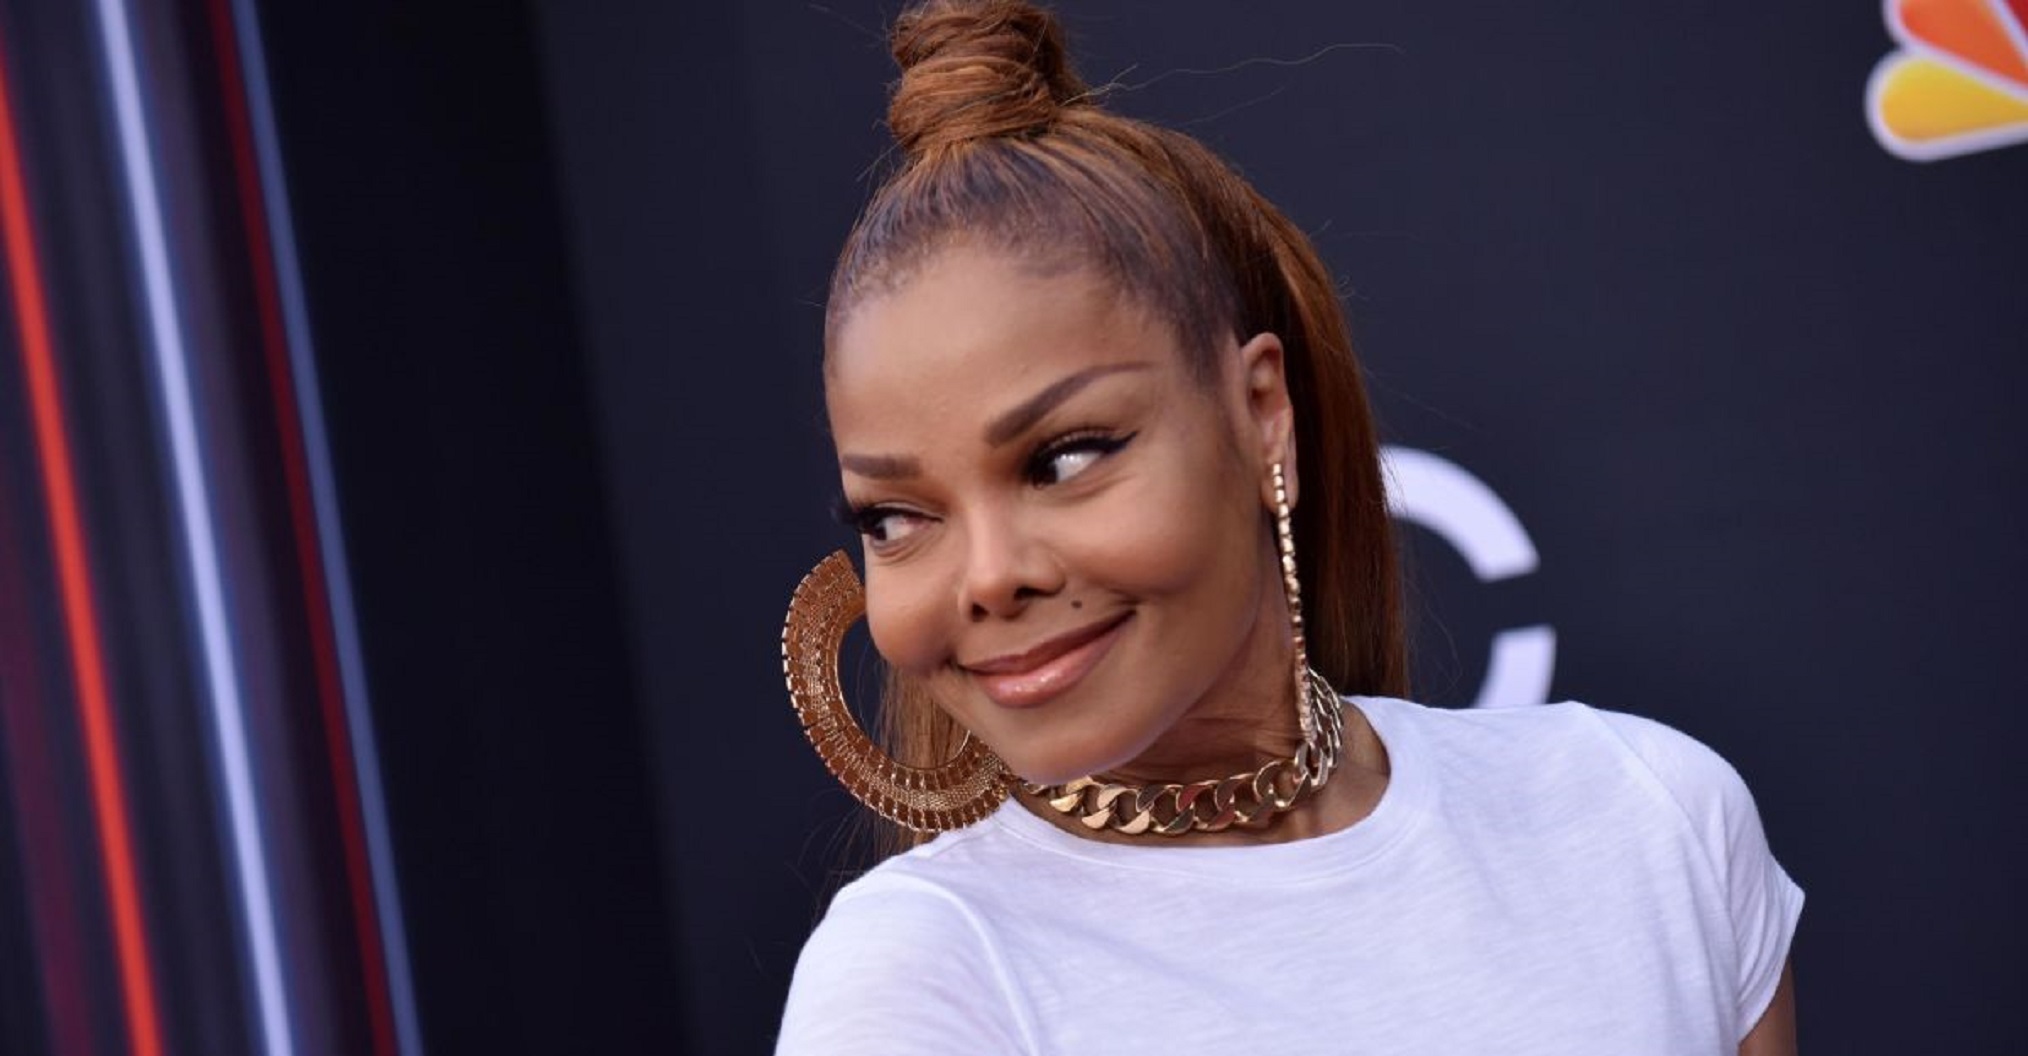 Janet Jackson: “I am currently in the process of producing a new song”